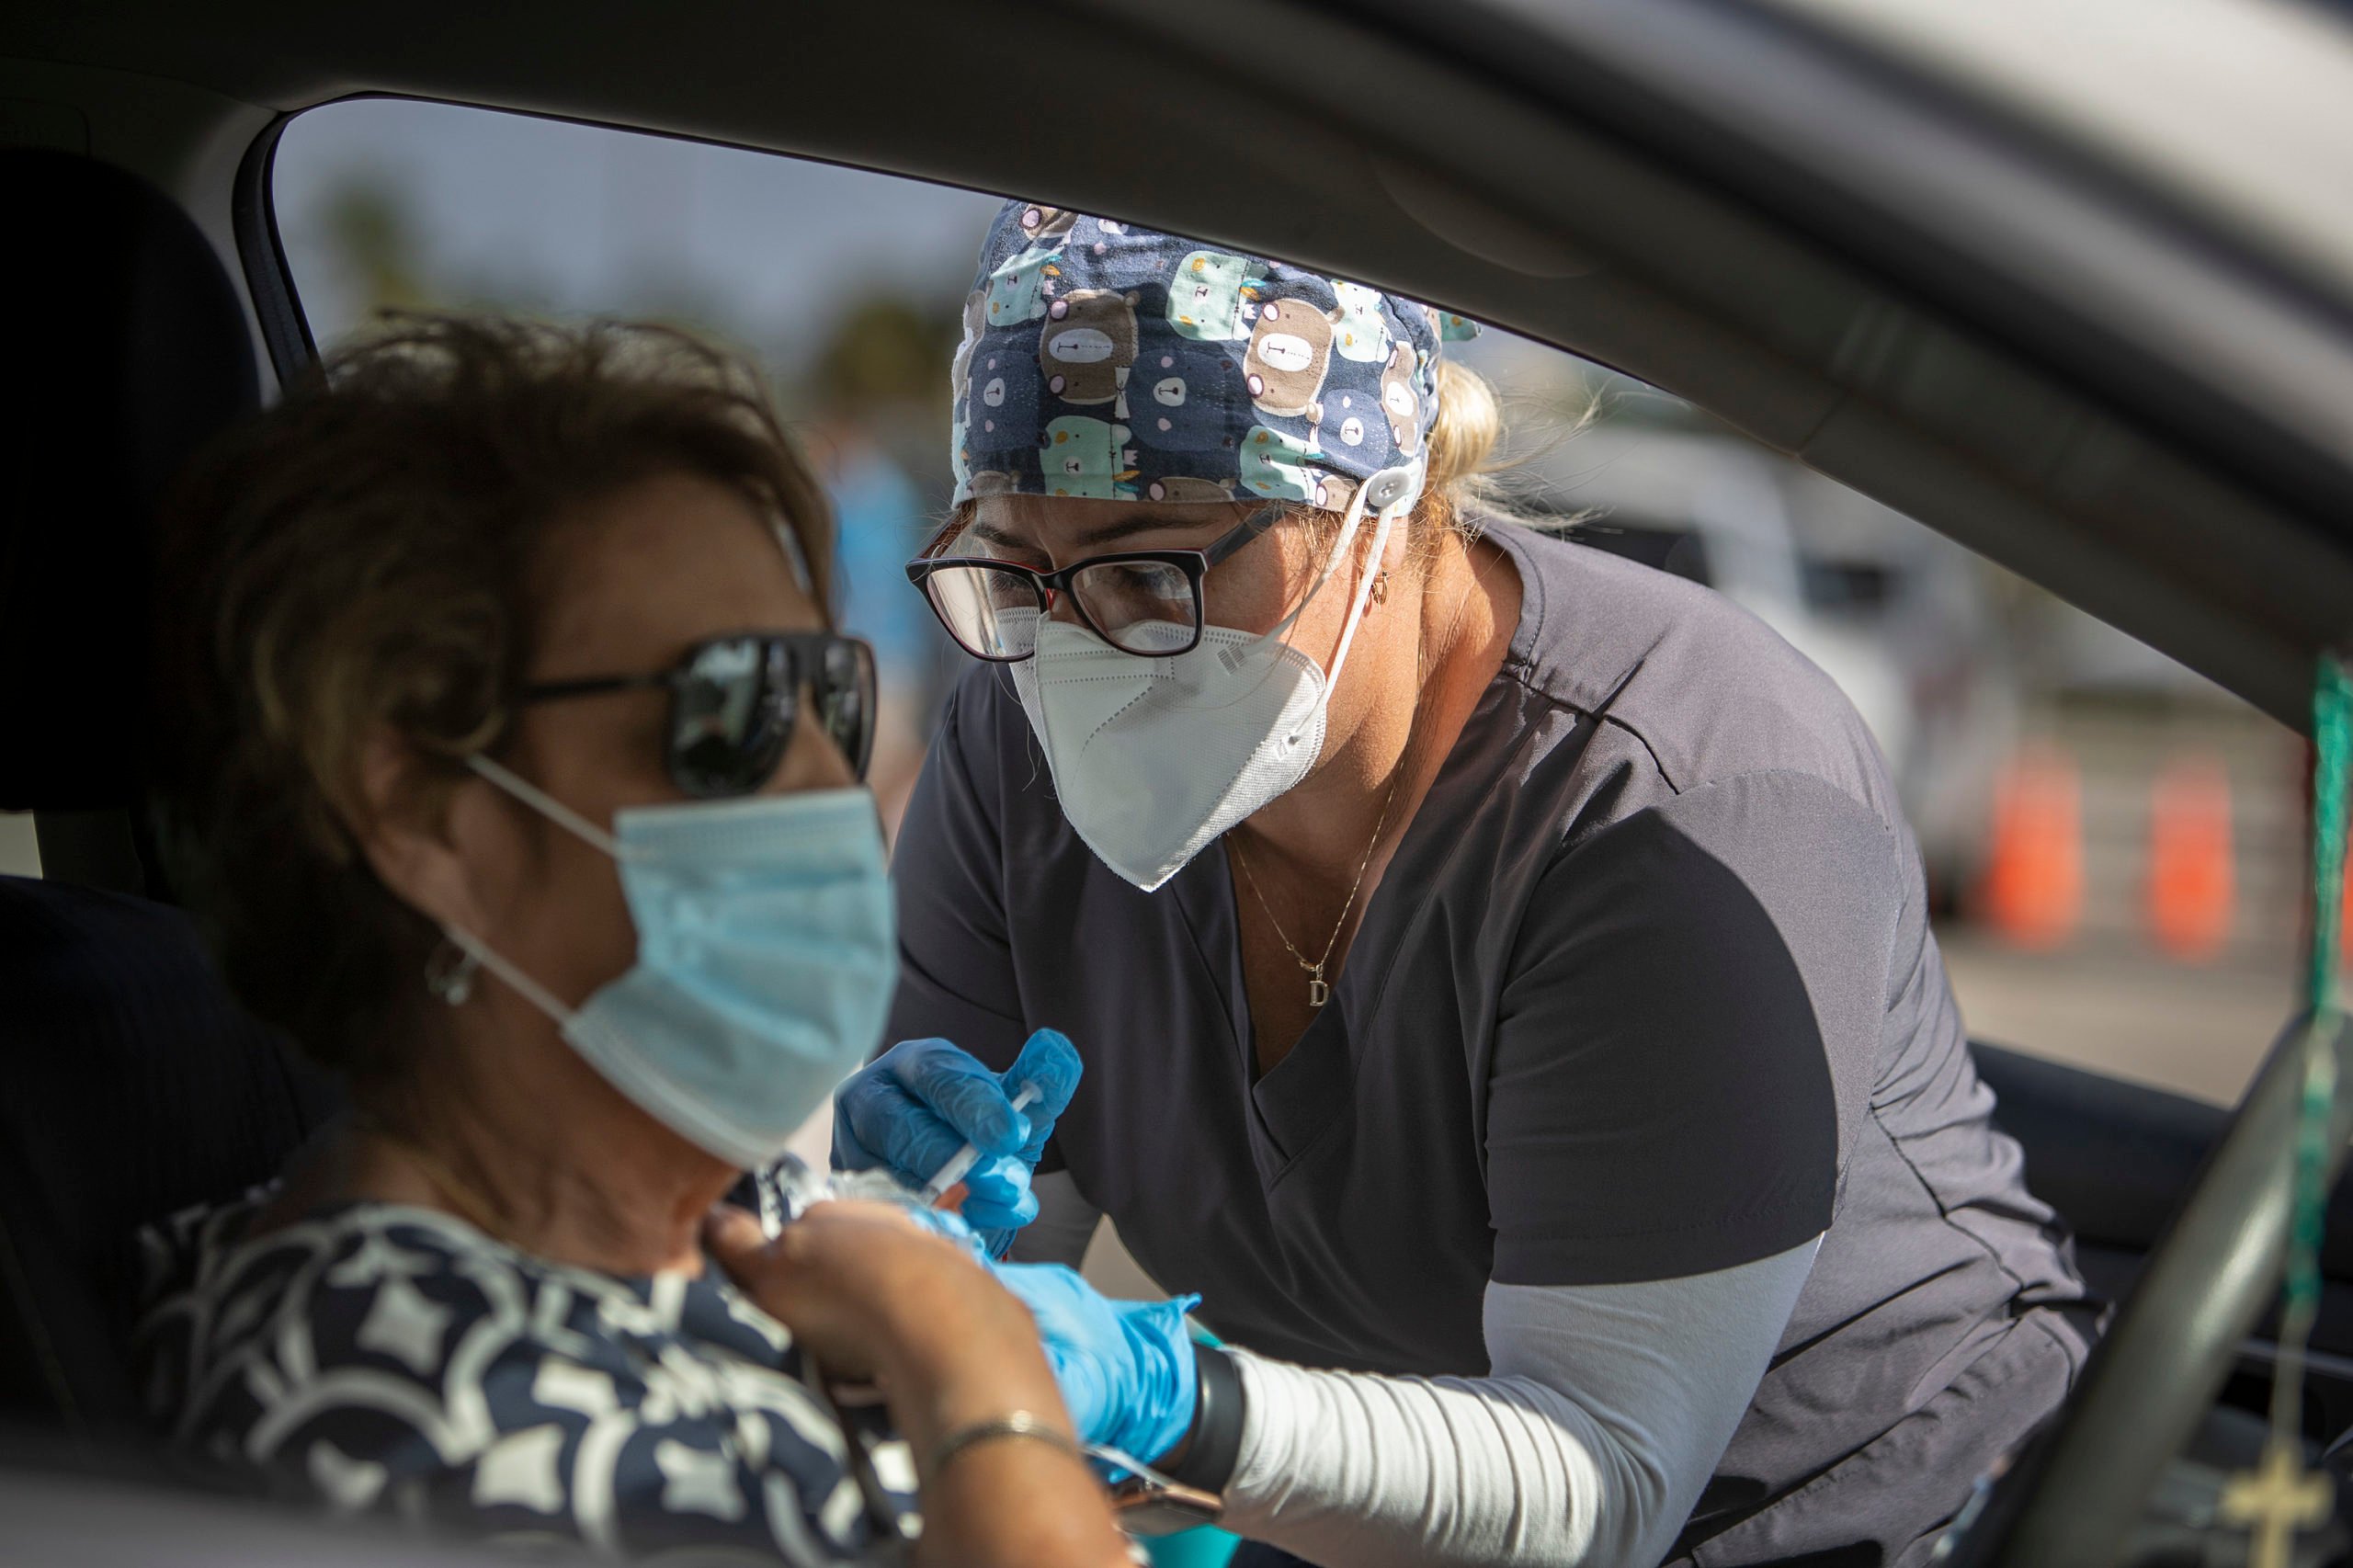 MIAMI, FLORIDA - DECEMBER 16: A healthcare worker administers a Pfizer-BioNTech COVID-19 vaccine to a person at a drive-thru site in Tropical Park on December 16, 2021 in Miami, Florida. Miami-Dade County Mayor Daniella Levine Cava visited the vaccination site to encourage residents to take holiday gatherings outside this year, get tested for COVID-19, and get vaccinated. (Photo by Joe Raedle/Getty Images)